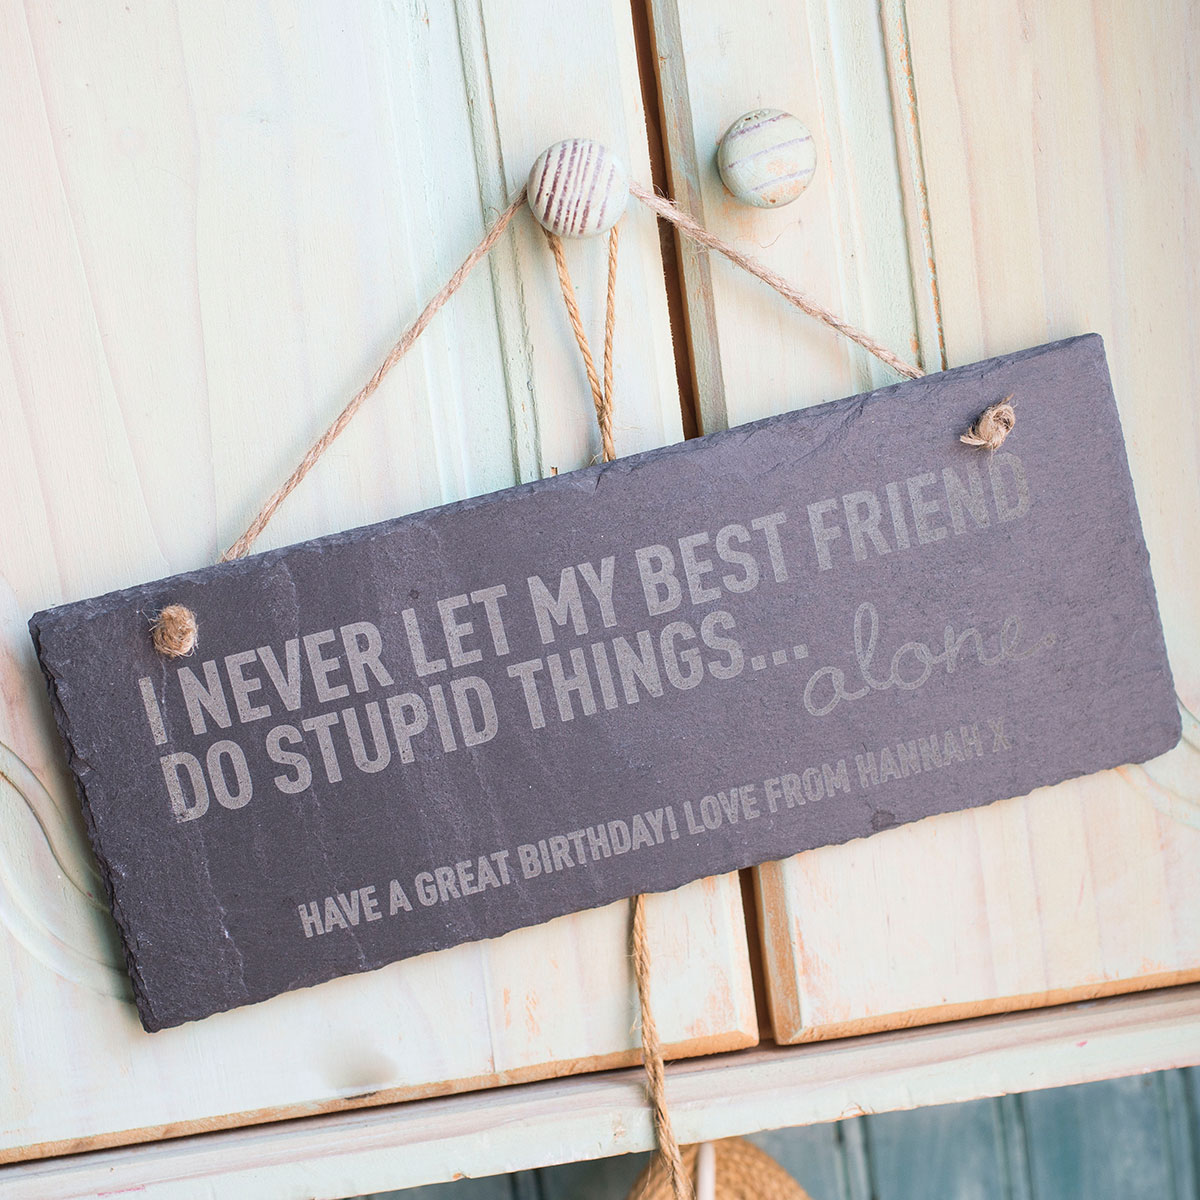 Personalised Hanging Slate Sign - I Never Let My Best Friend...